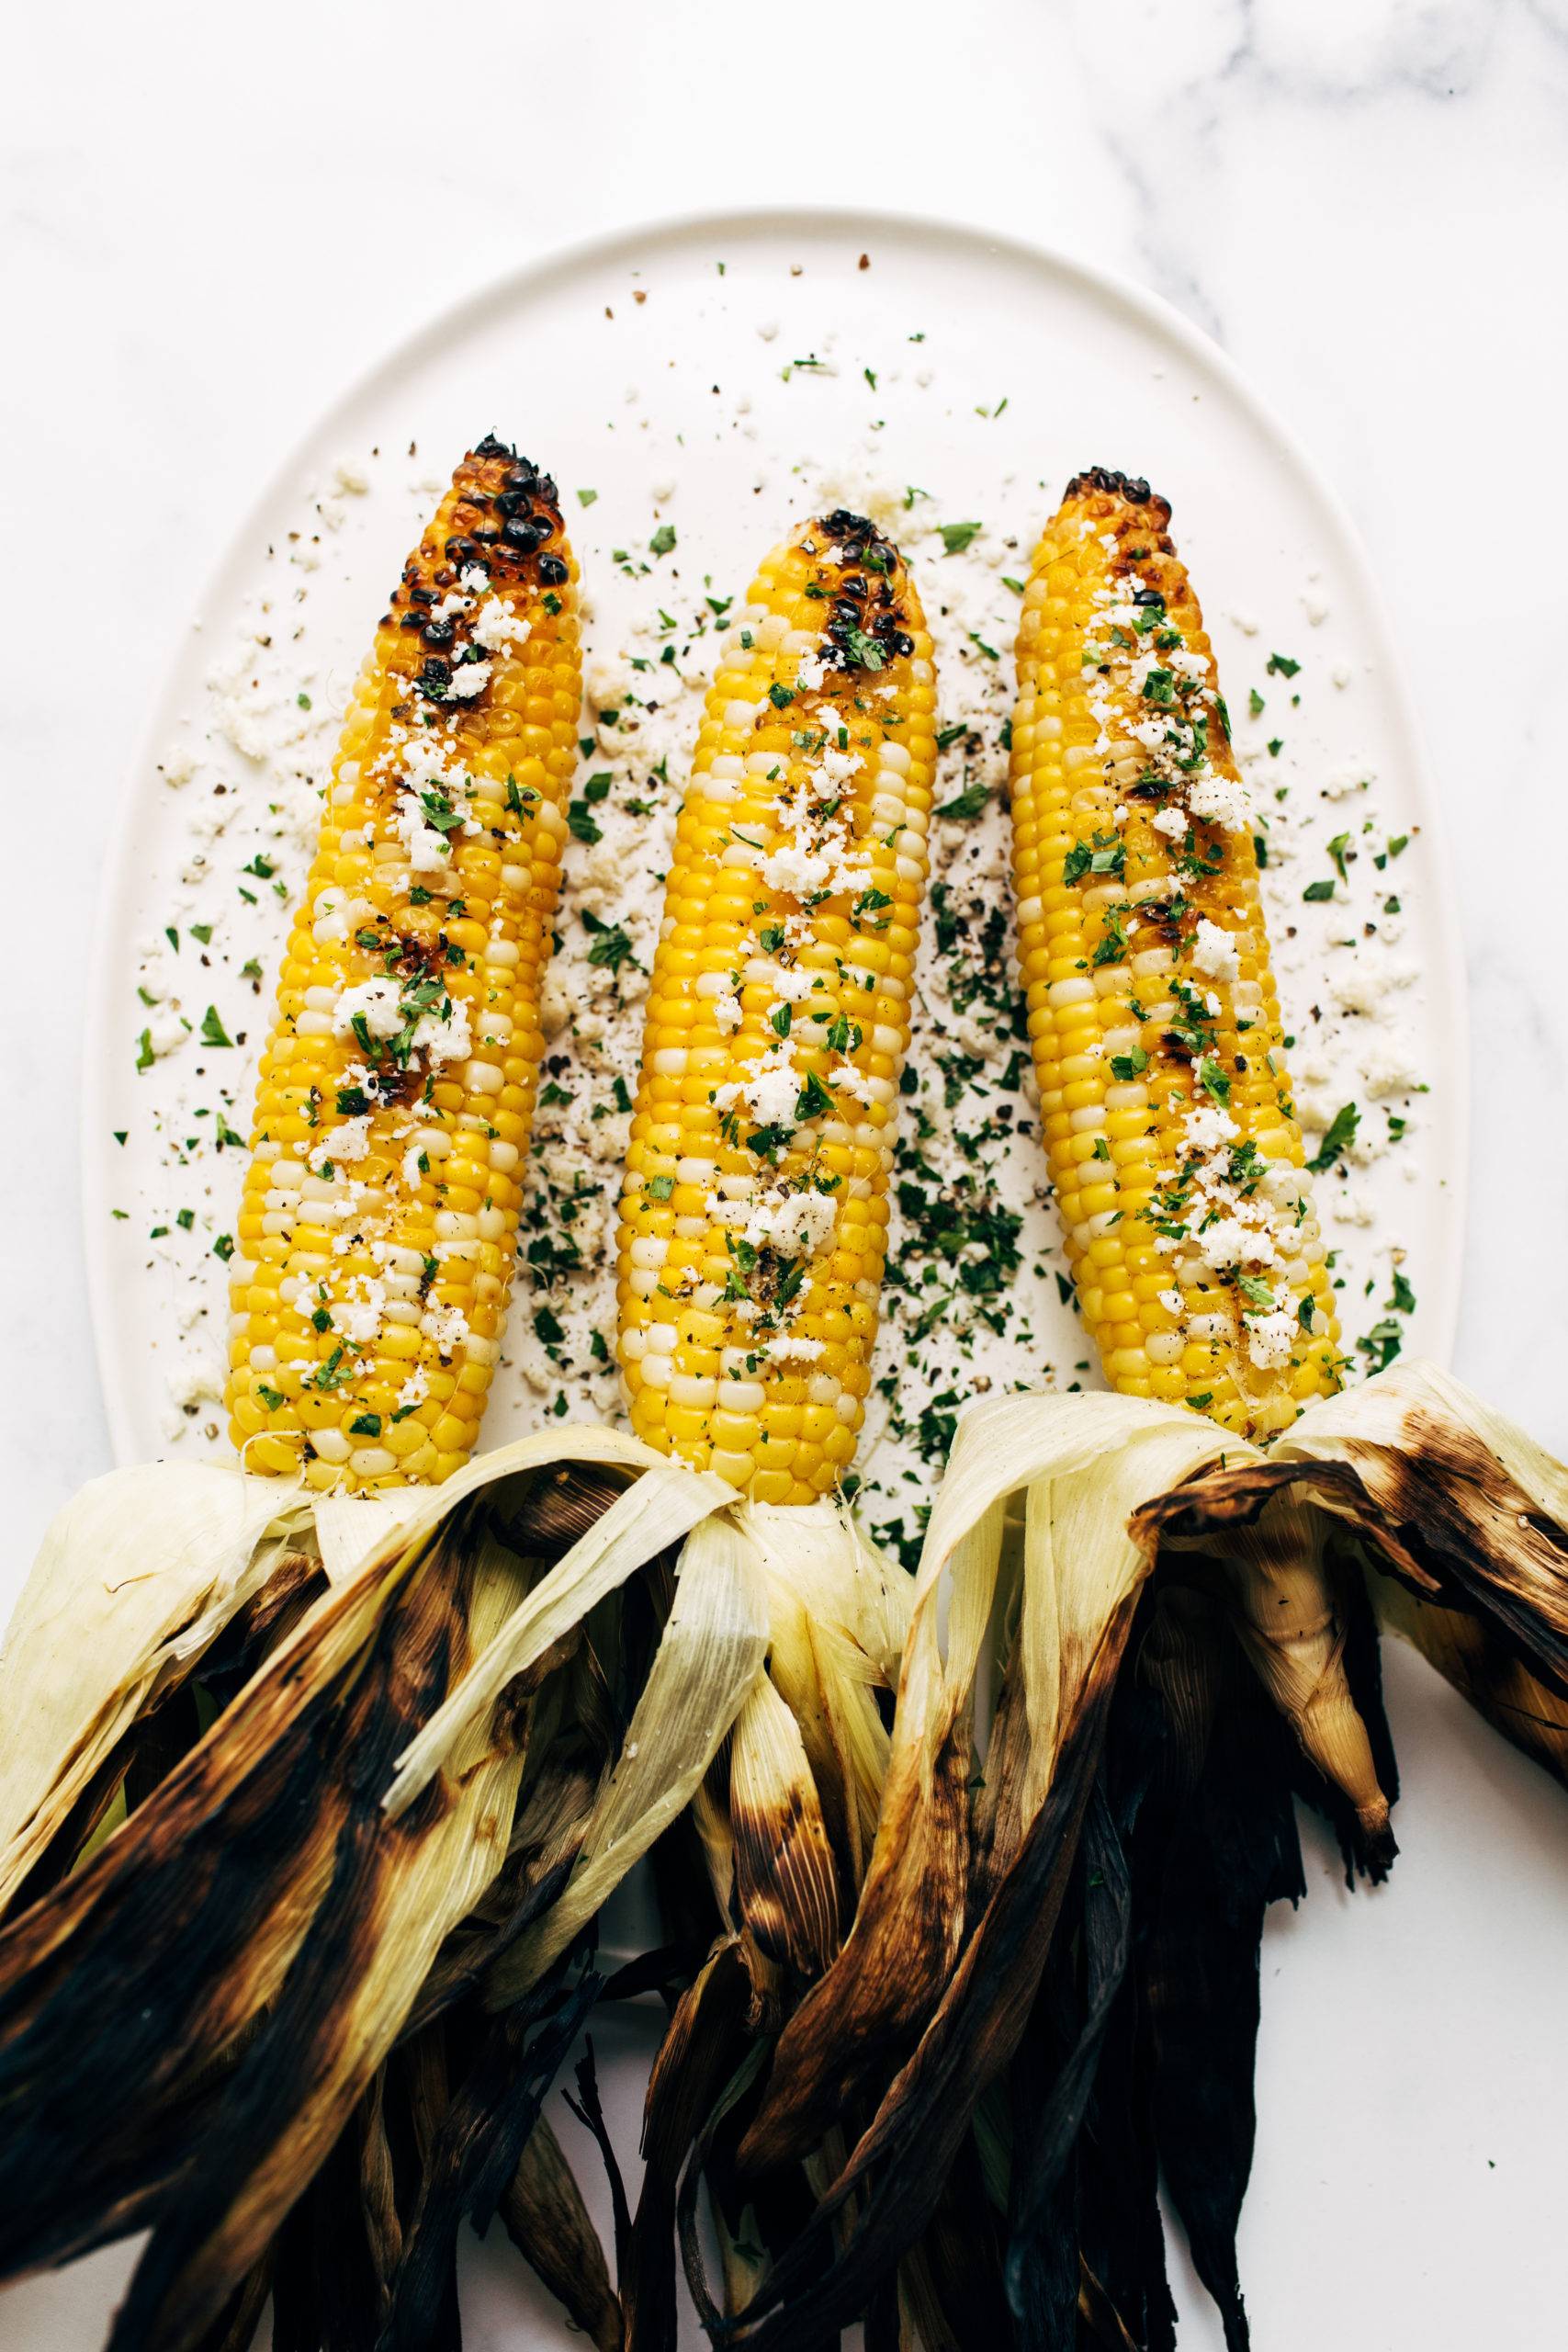 Three ears of grilled corn on a plate with husks pulled back, sprinkled with cheese and parsley.